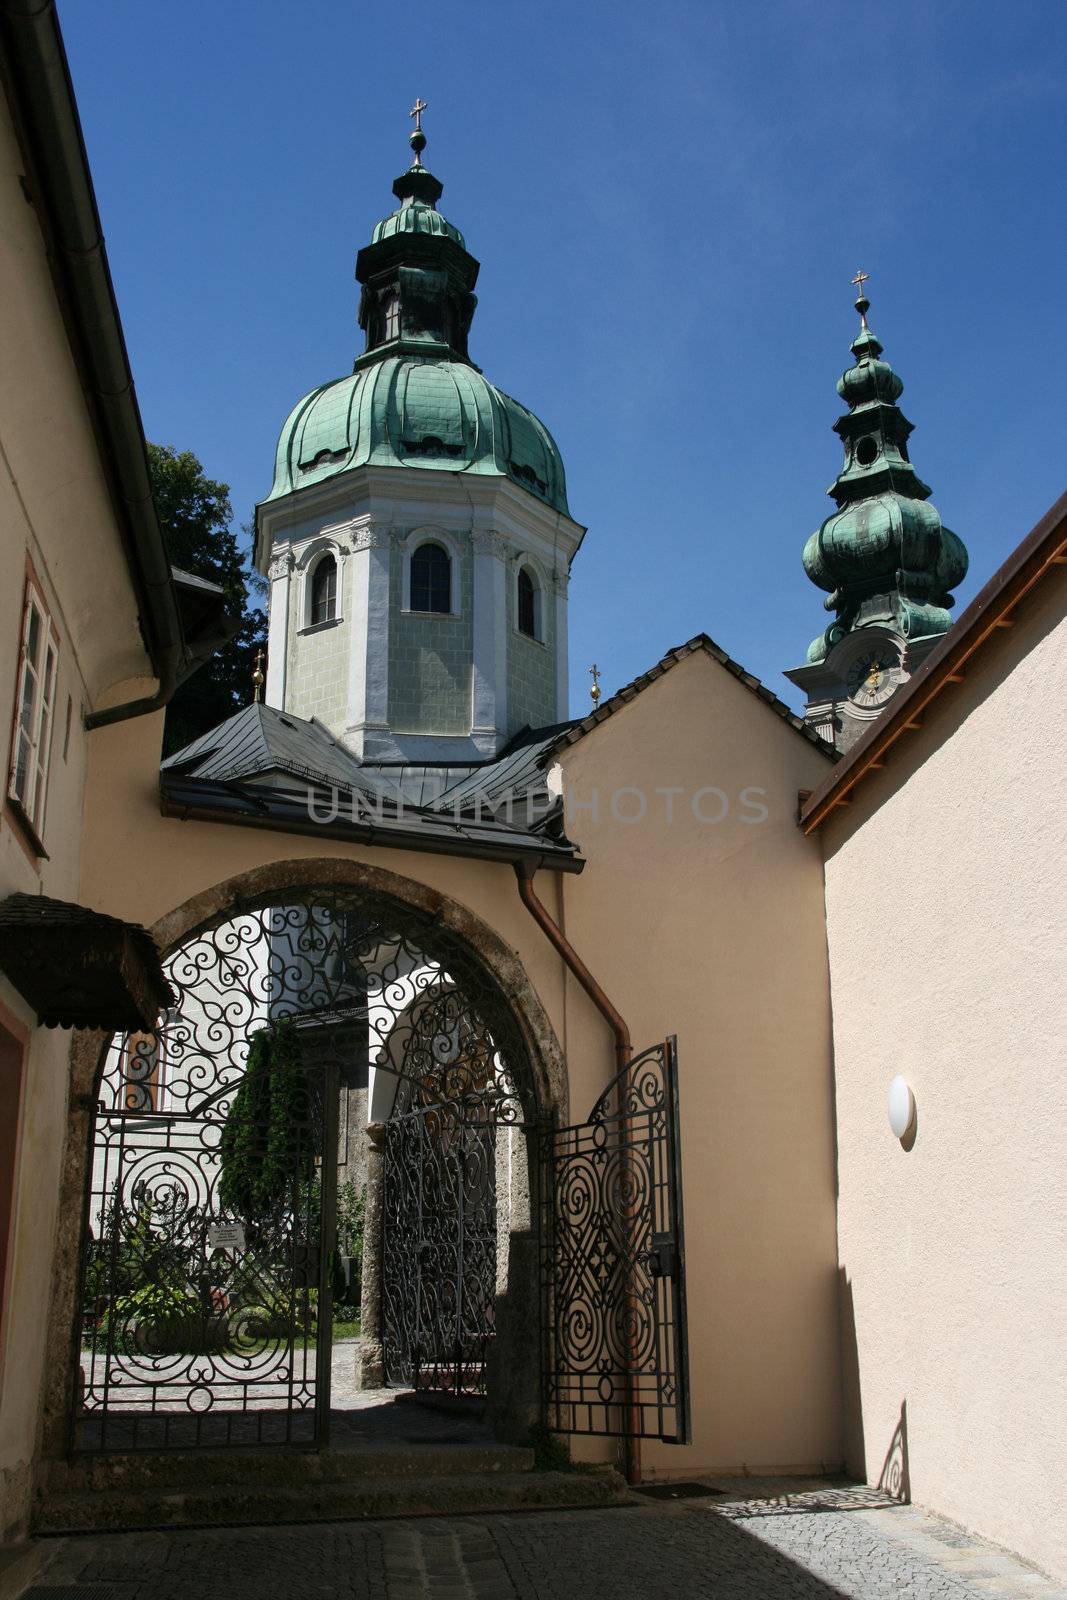 Saint Peter's Abbey Church (Stiftskirche St. Peter) and the entrance to the cemetery in Salzburg, Austria